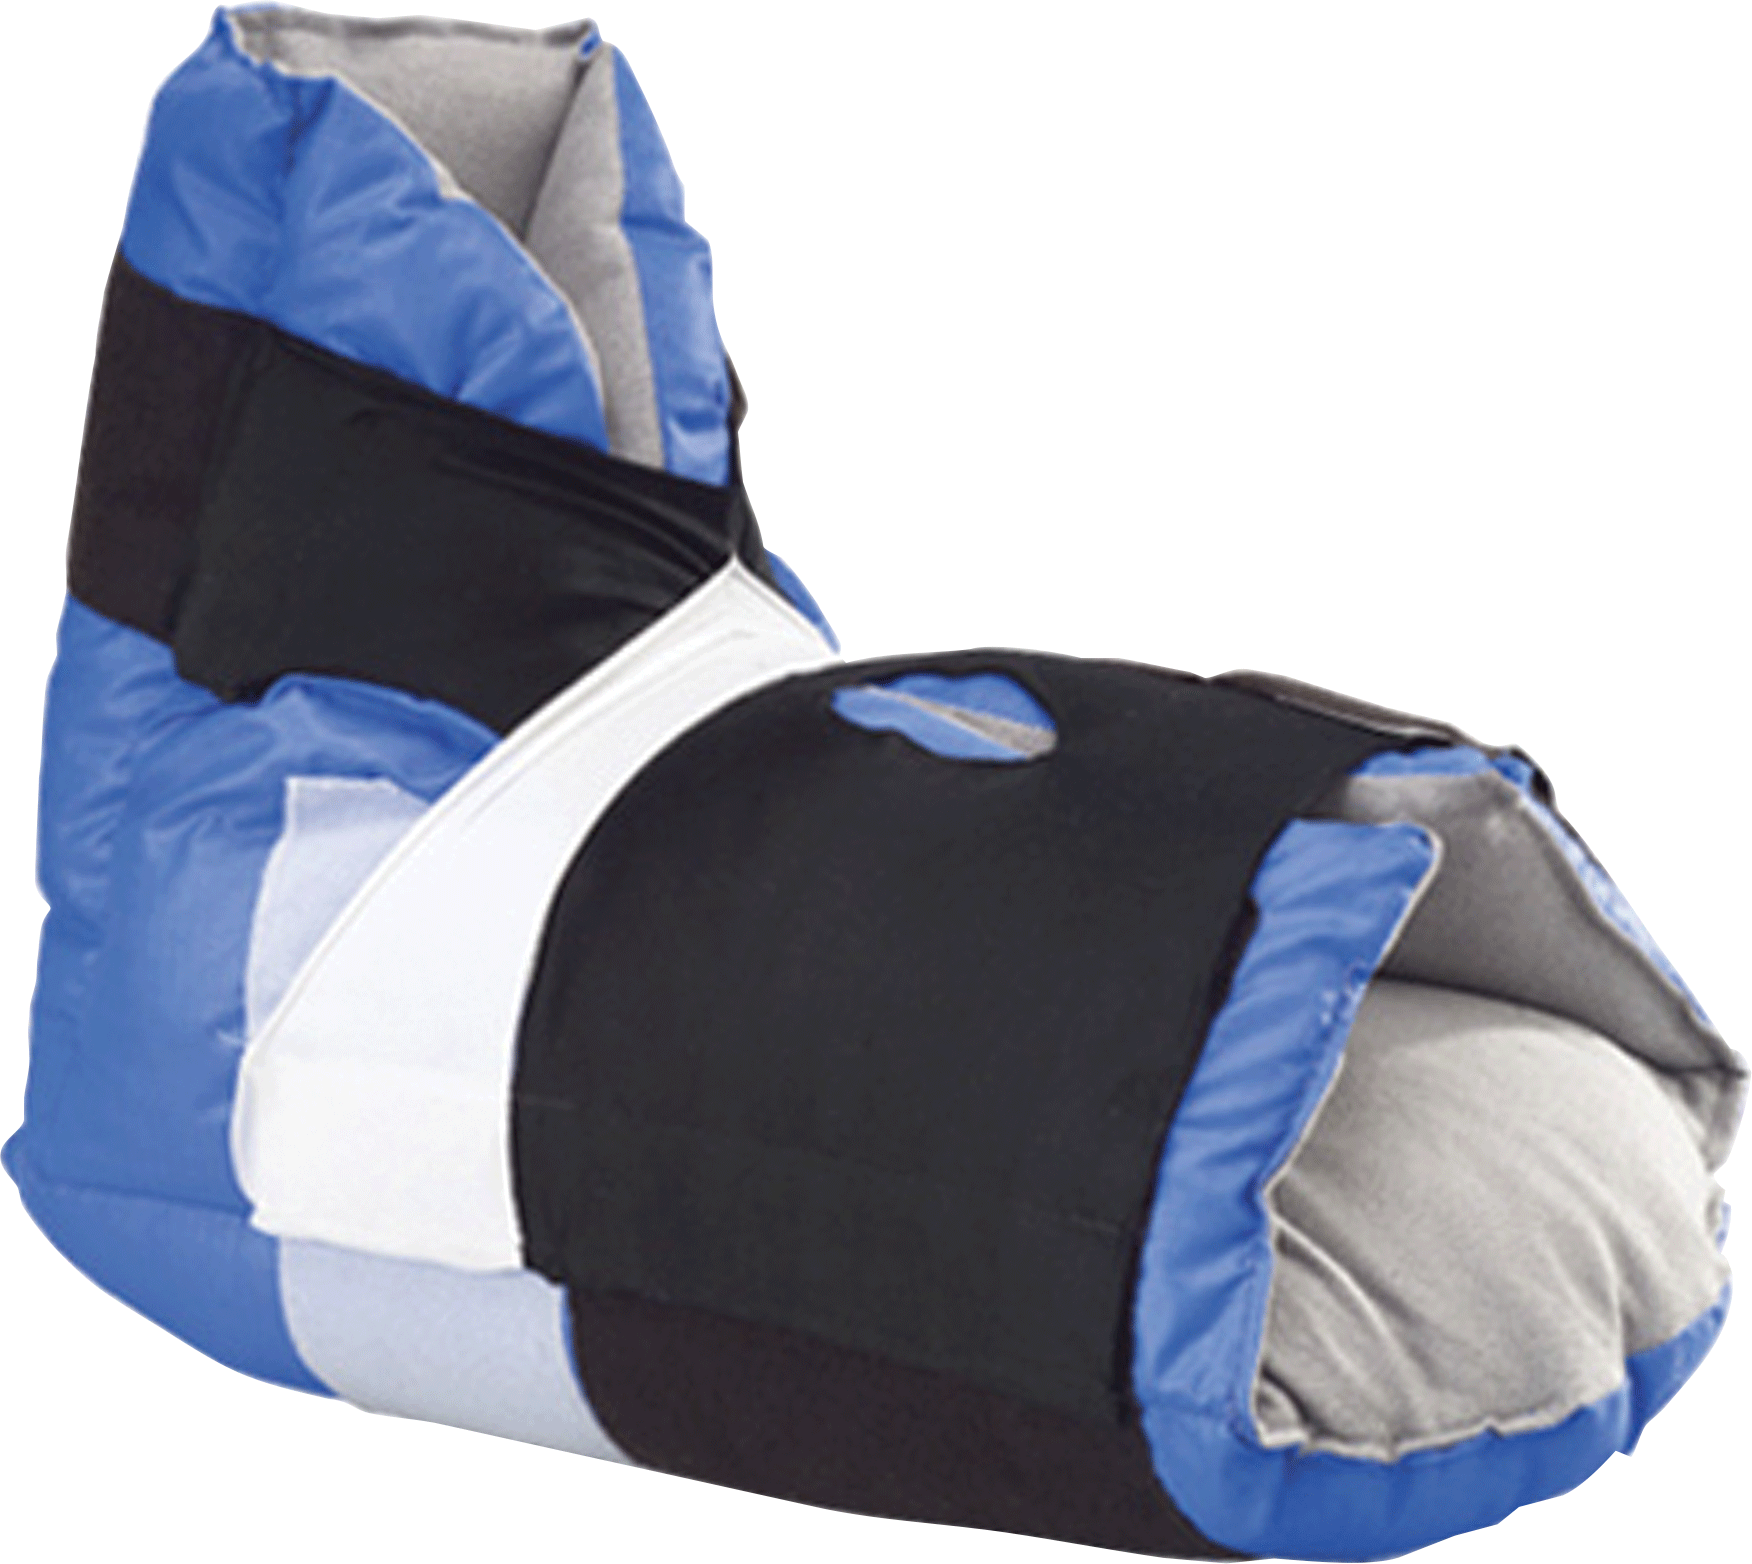 CA/8 - Sage Products Prevalon&reg; Pressure-Relieving Heel Protector Universal Size, Blue and Gray, 10" to 18" Calf Circumference - Best Buy Medical Supplies